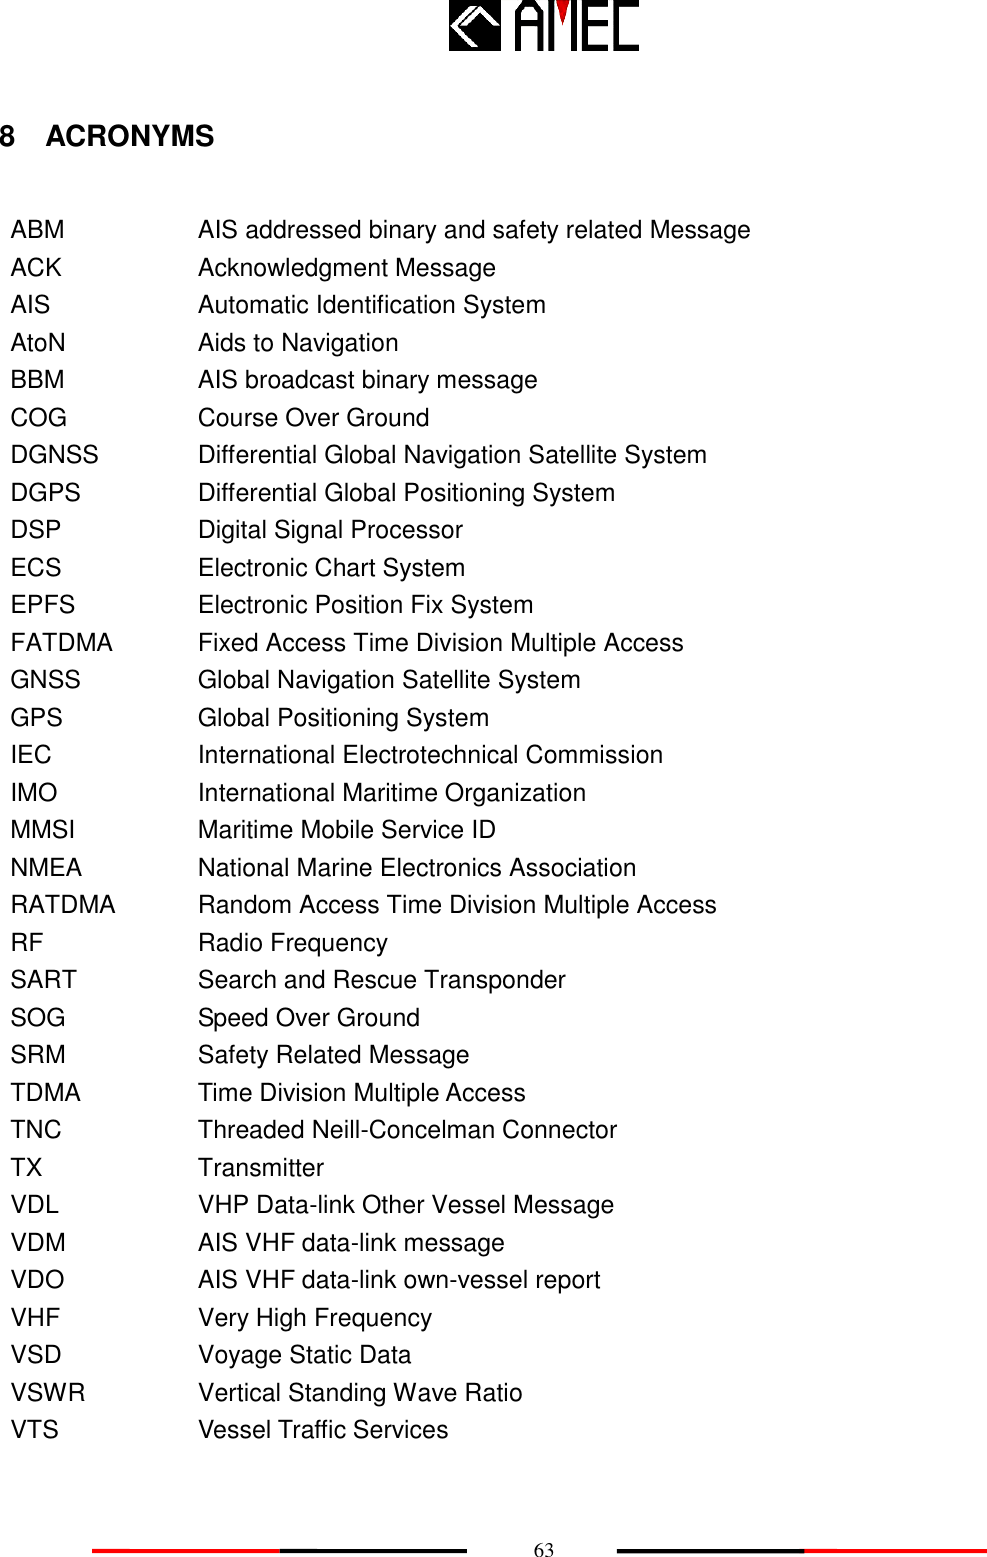    63 8  ACRONYMS  ABM AIS addressed binary and safety related Message ACK Acknowledgment Message AIS Automatic Identification System AtoN Aids to Navigation BBM AIS broadcast binary message COG Course Over Ground DGNSS Differential Global Navigation Satellite System DGPS Differential Global Positioning System DSP Digital Signal Processor ECS Electronic Chart System EPFS Electronic Position Fix System FATDMA Fixed Access Time Division Multiple Access GNSS Global Navigation Satellite System GPS Global Positioning System IEC International Electrotechnical Commission IMO International Maritime Organization MMSI Maritime Mobile Service ID NMEA National Marine Electronics Association RATDMA Random Access Time Division Multiple Access RF Radio Frequency SART Search and Rescue Transponder SOG Speed Over Ground SRM Safety Related Message TDMA Time Division Multiple Access TNC Threaded Neill-Concelman Connector TX Transmitter VDL VHP Data-link Other Vessel Message VDM AIS VHF data-link message VDO AIS VHF data-link own-vessel report VHF Very High Frequency VSD Voyage Static Data VSWR Vertical Standing Wave Ratio VTS Vessel Traffic Services  